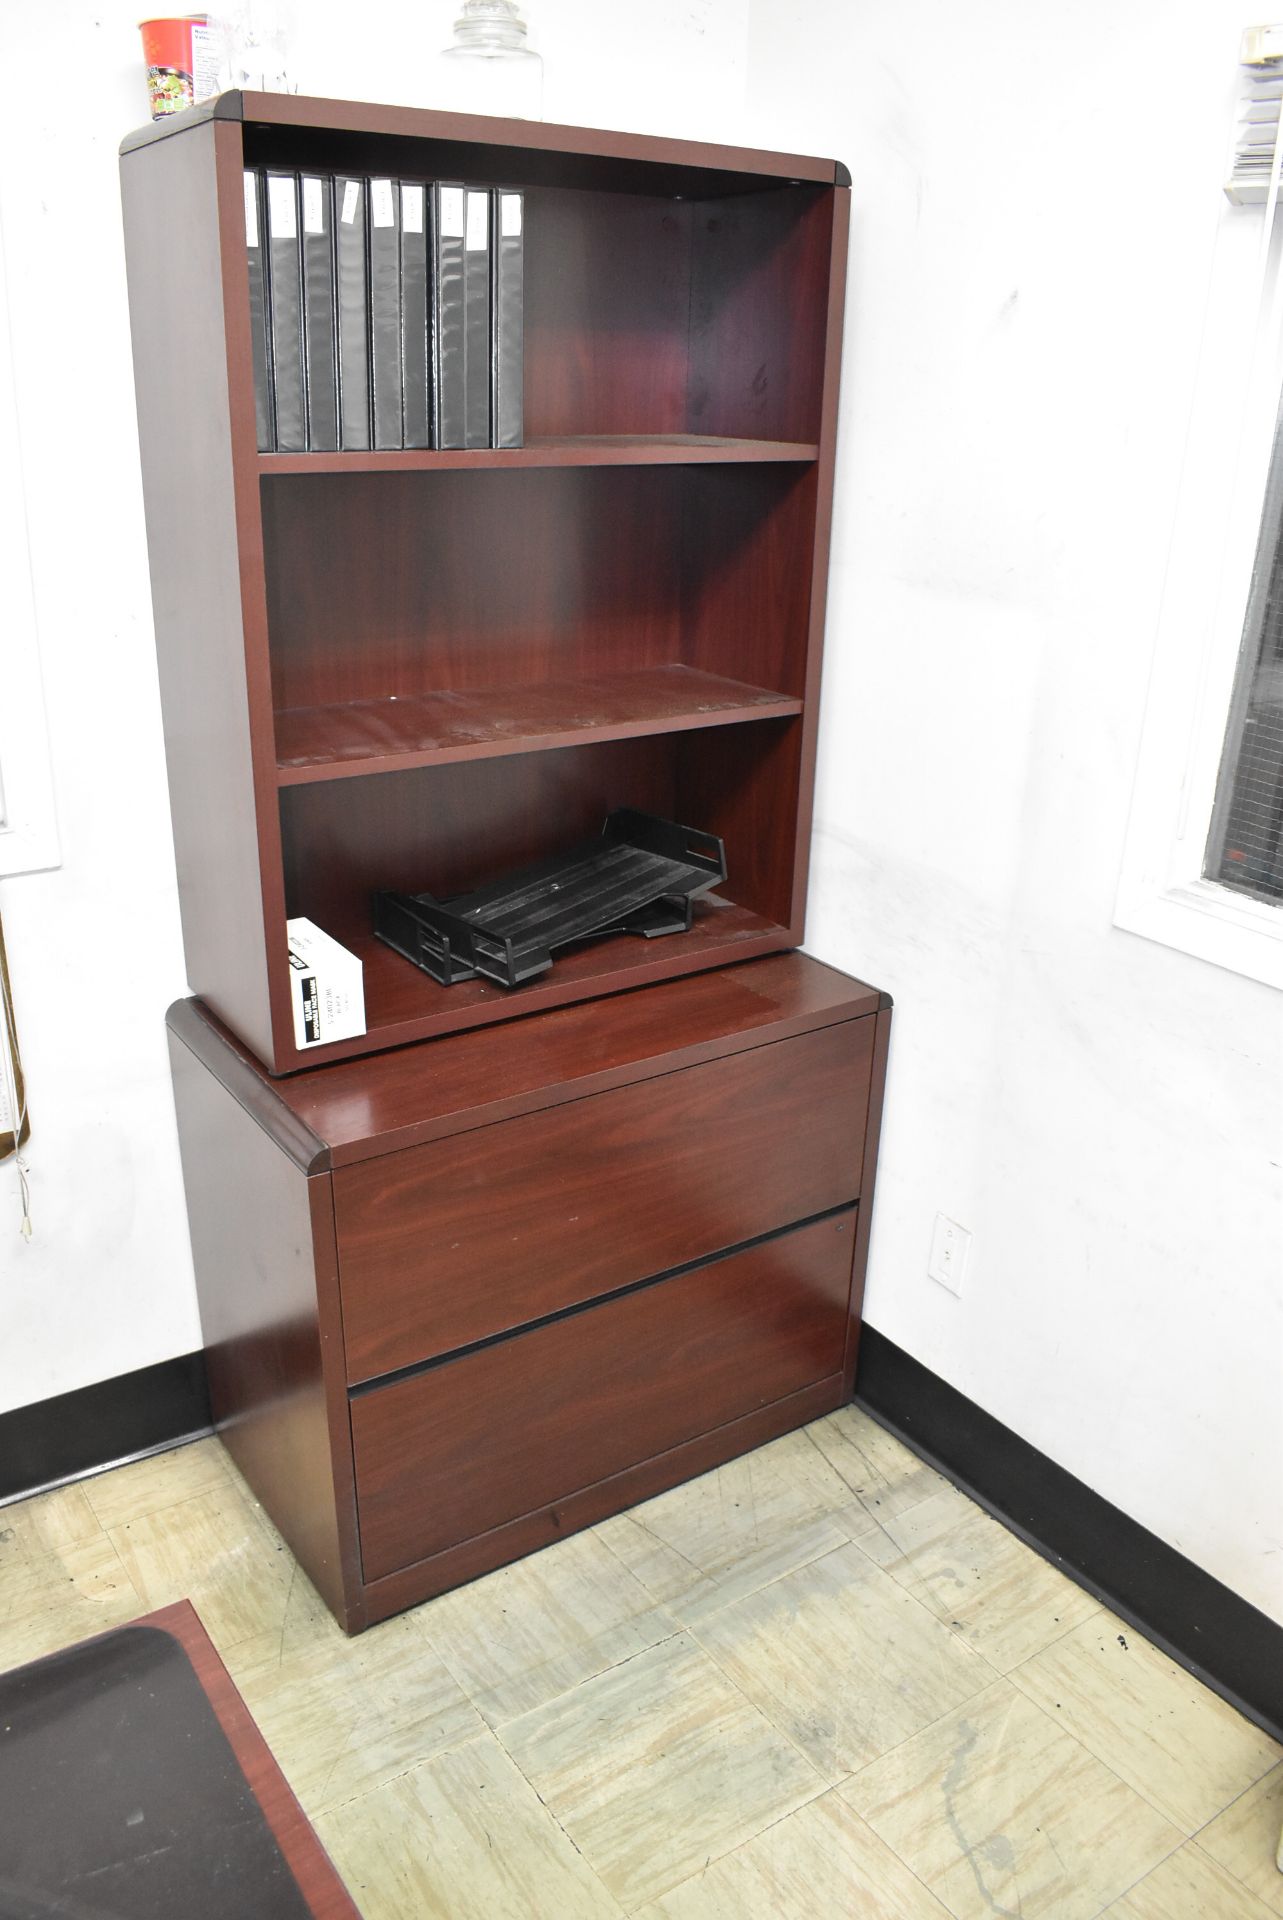 LOT/ CONTENTS OF OFFICE (FURNITURE ONLY) - INCLUDING DESK, OFFICE CHAIR, SHELF UNIT, 2-DRAWER - Image 2 of 2